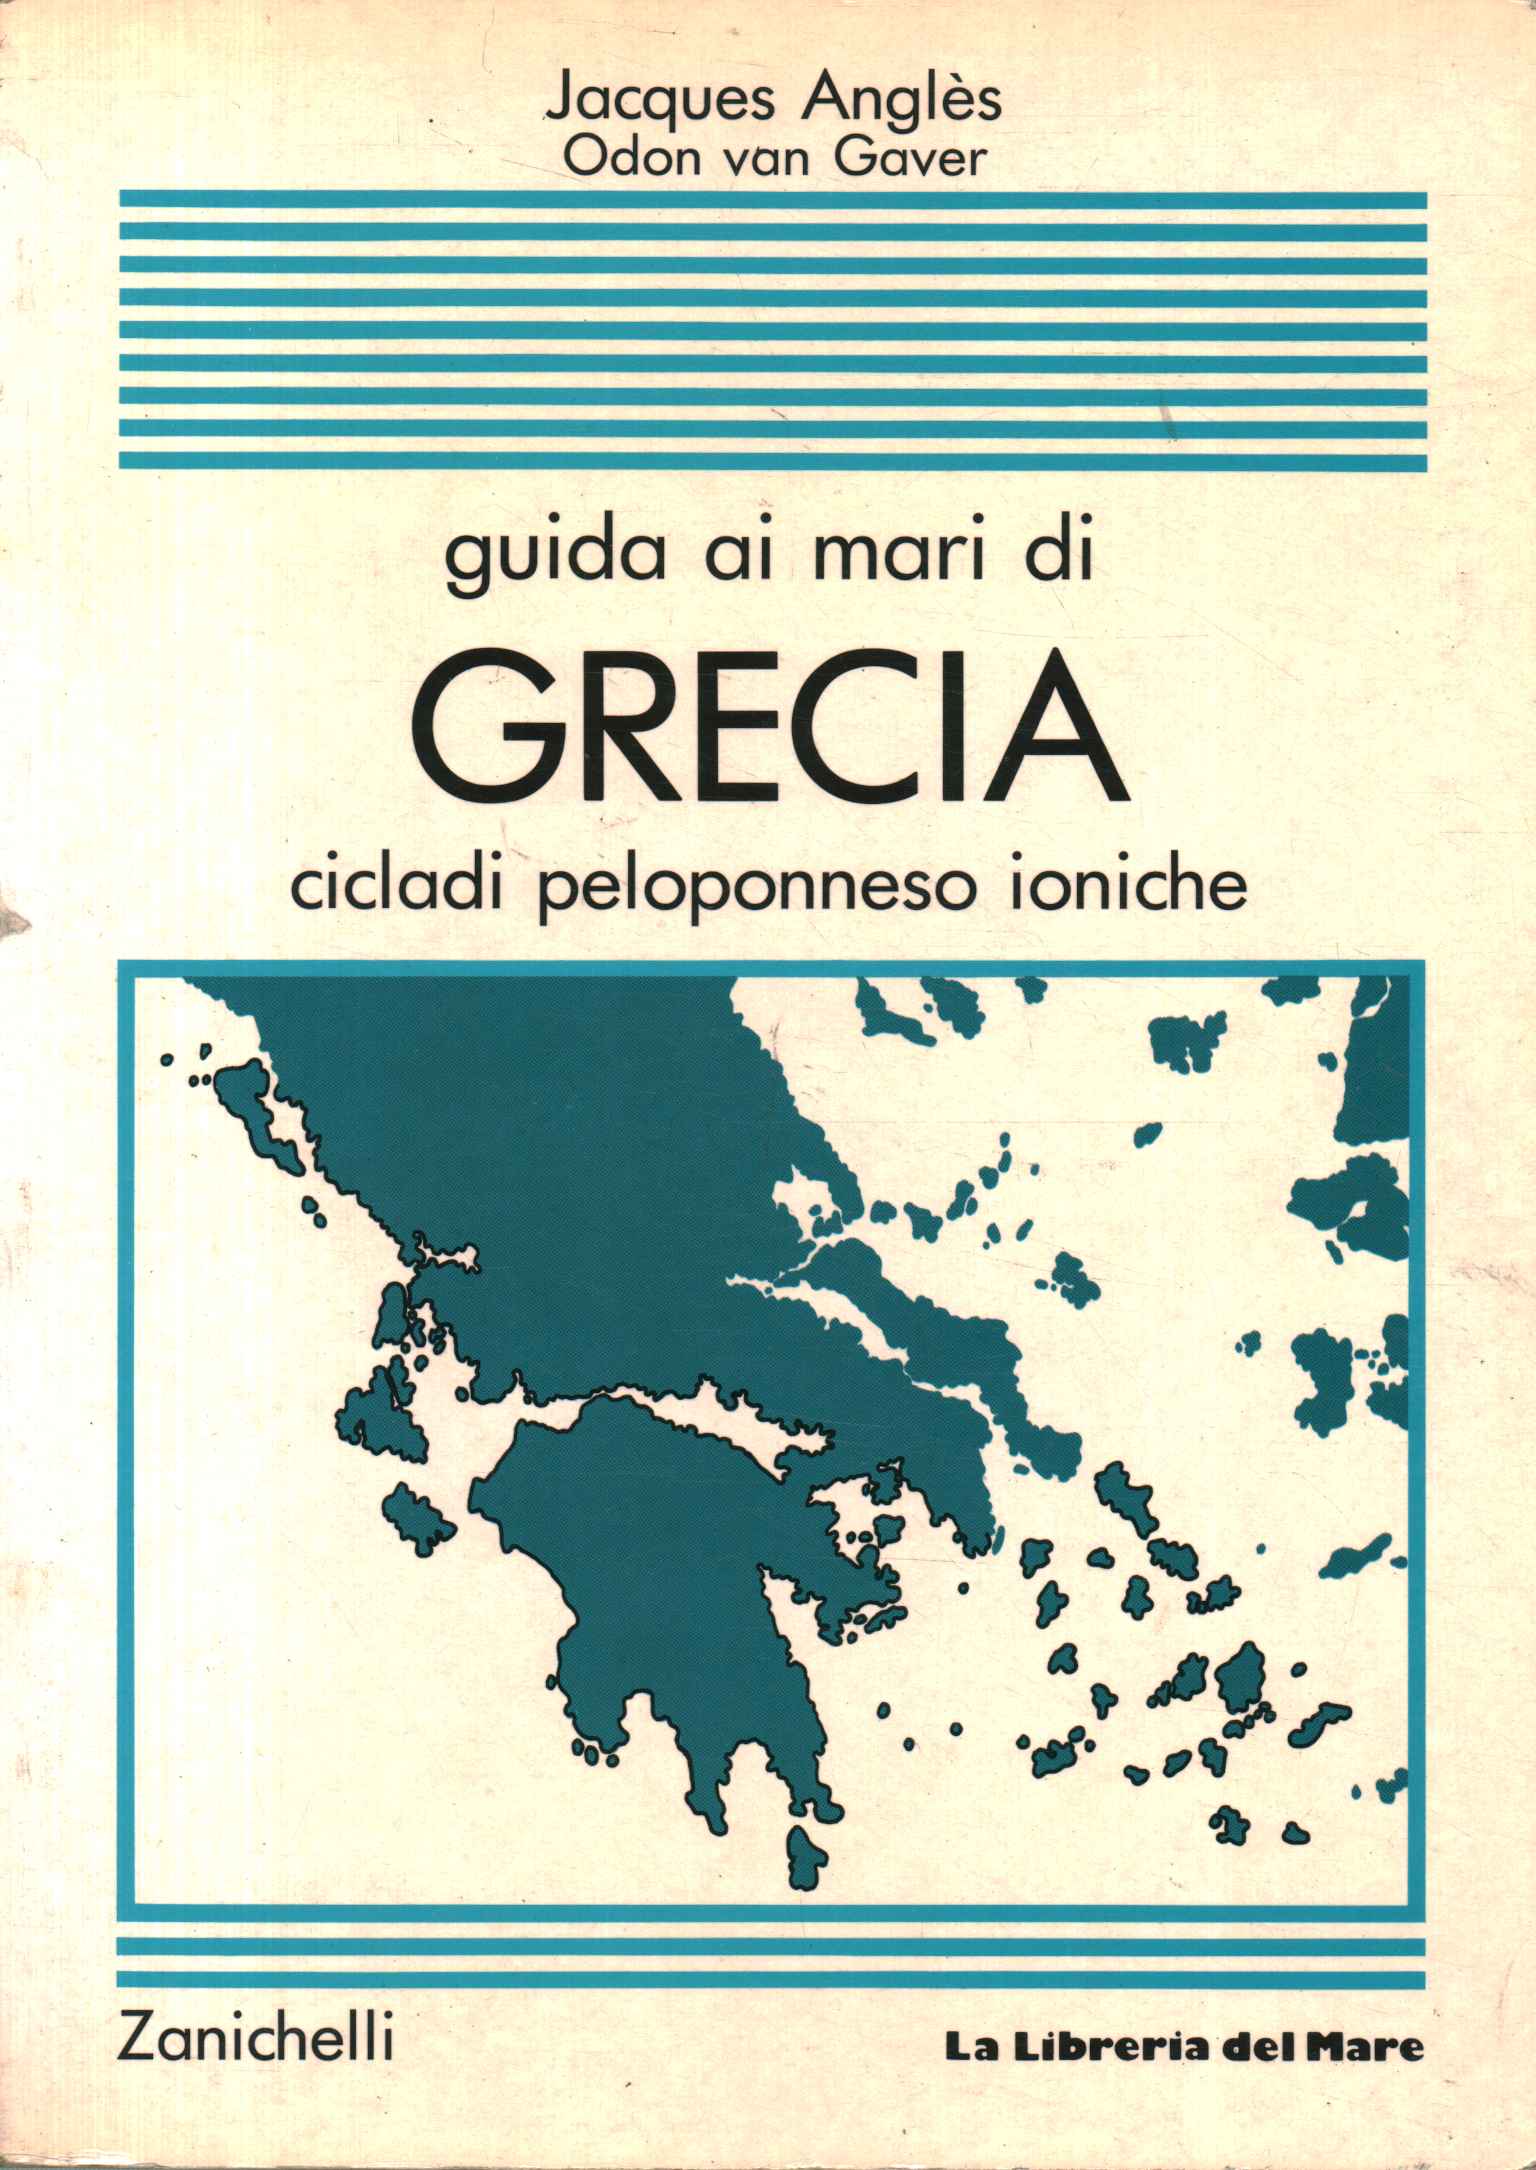 Guide to the seas of Greece